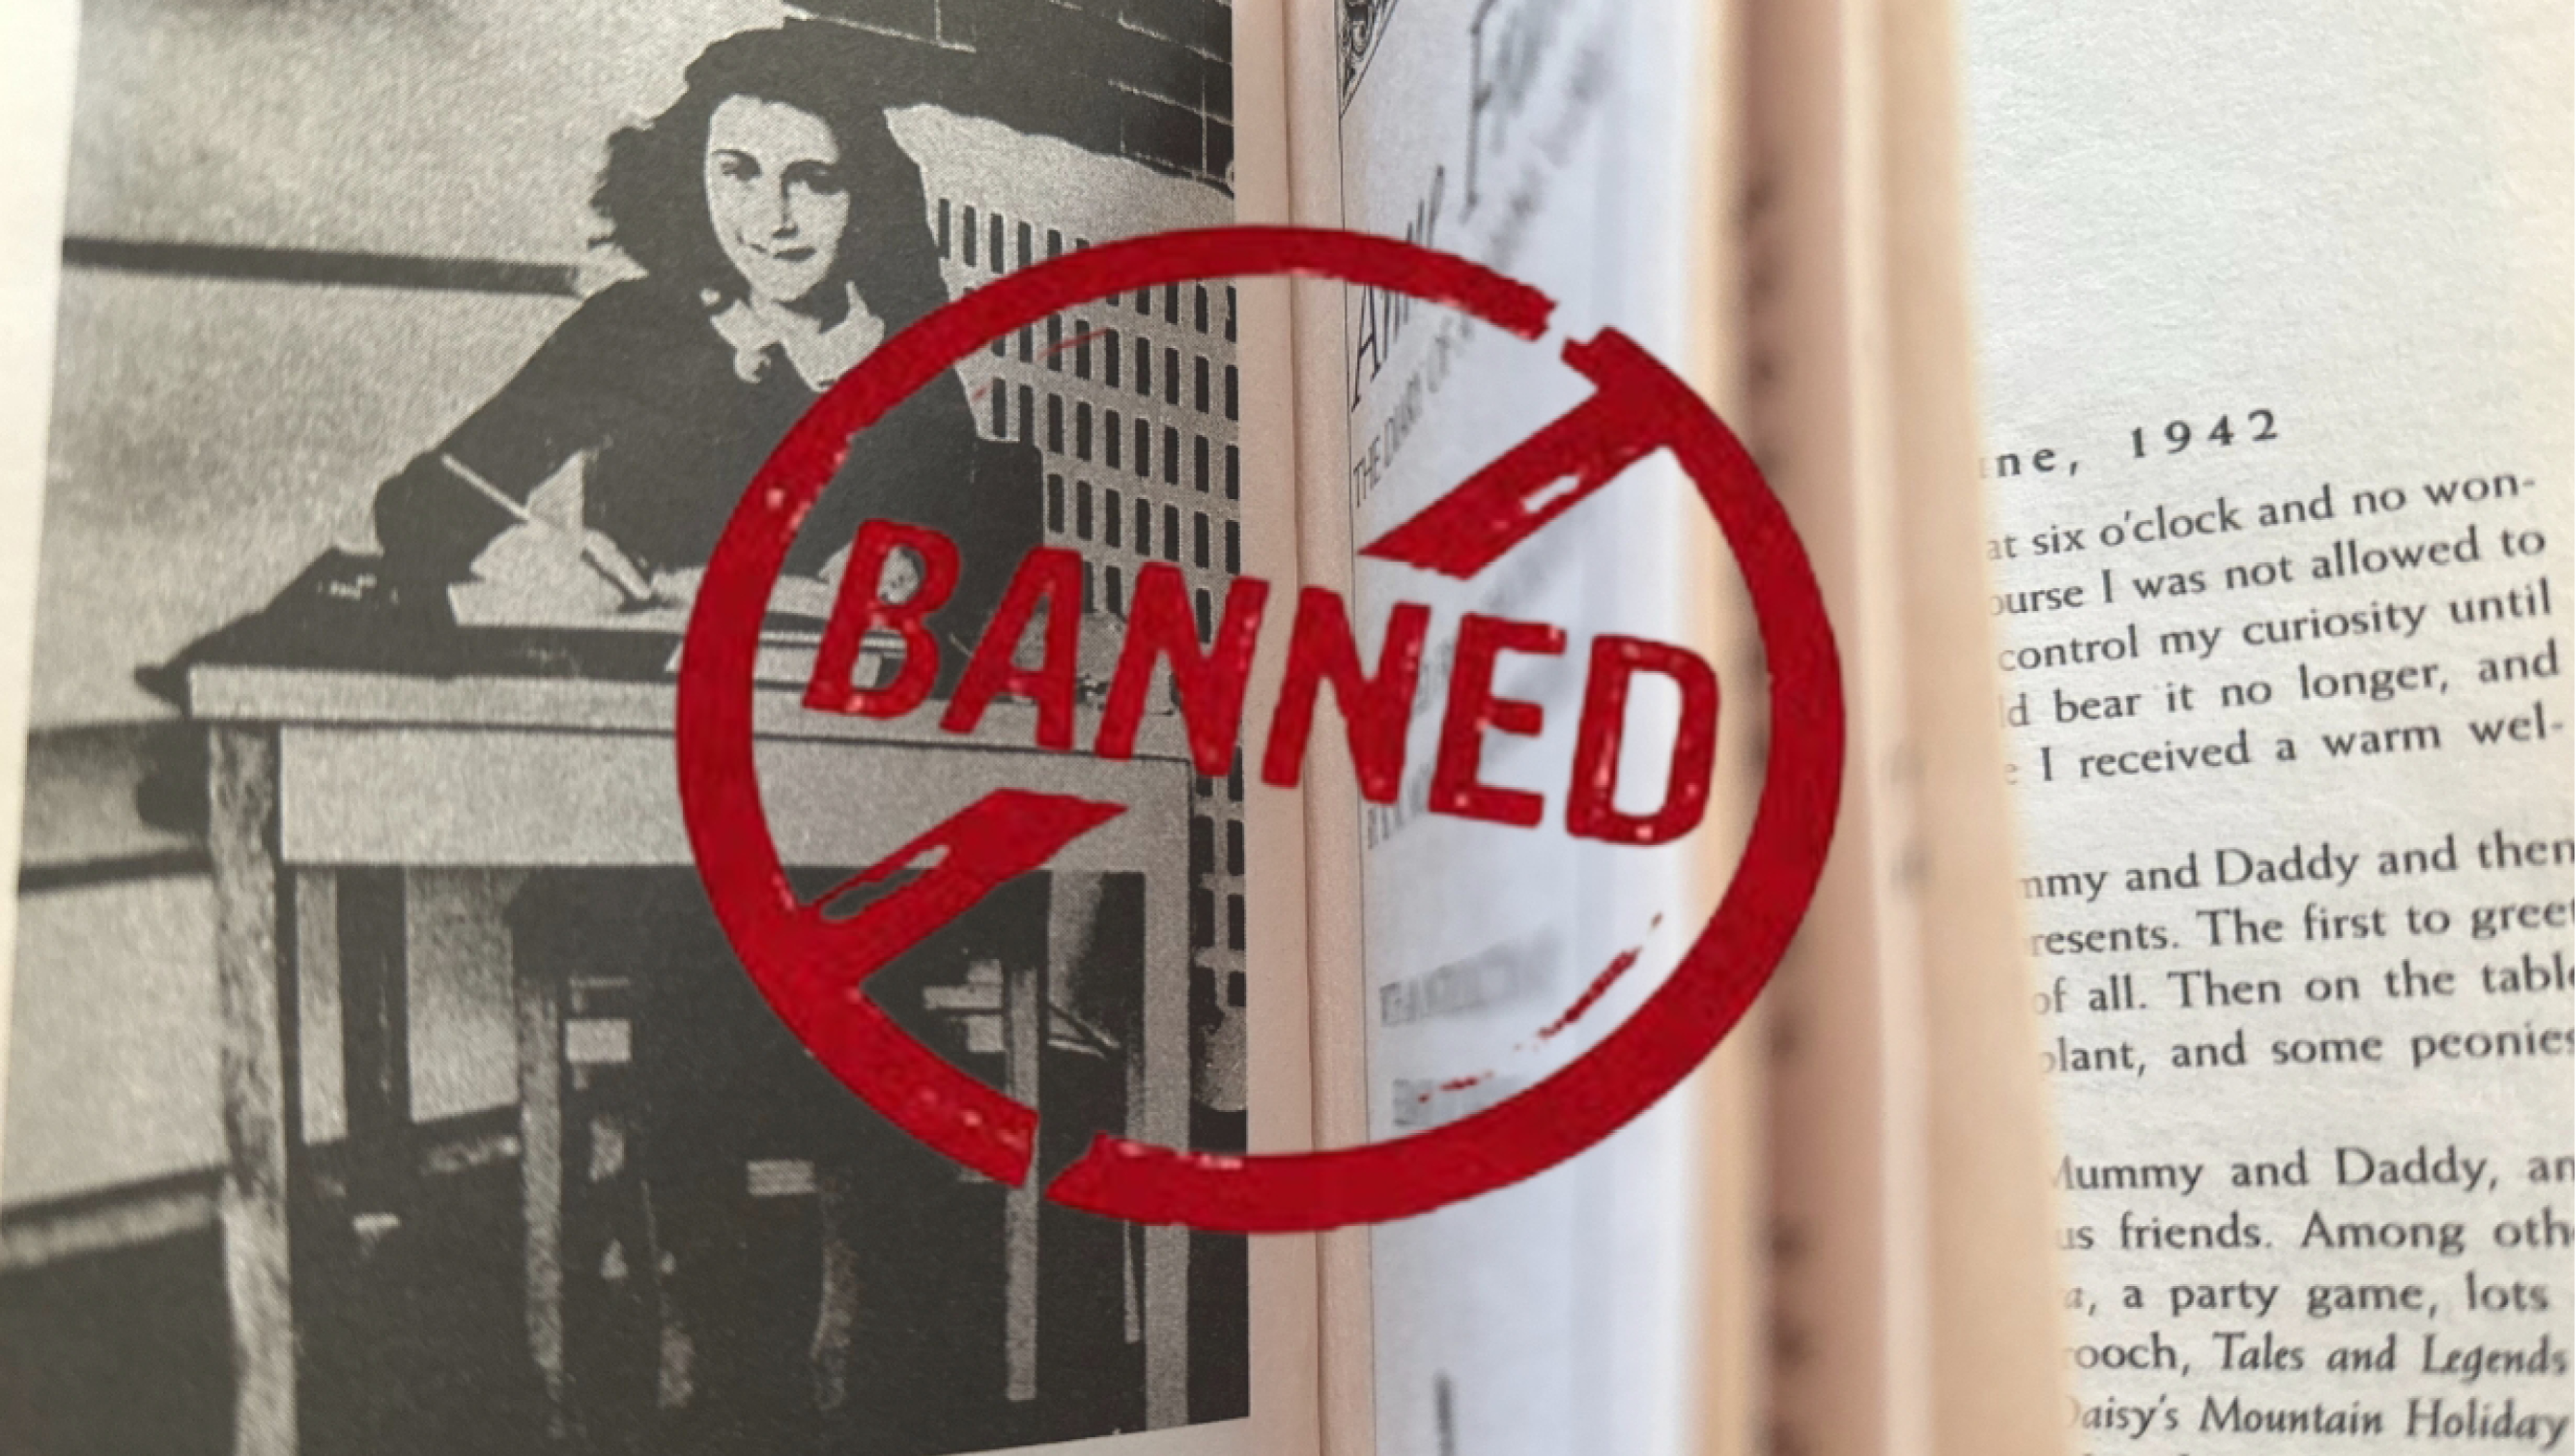 A photo of the book "The Diary of a Young Girl" by Anne Frank with a red stamp across it that reads "BANNED"